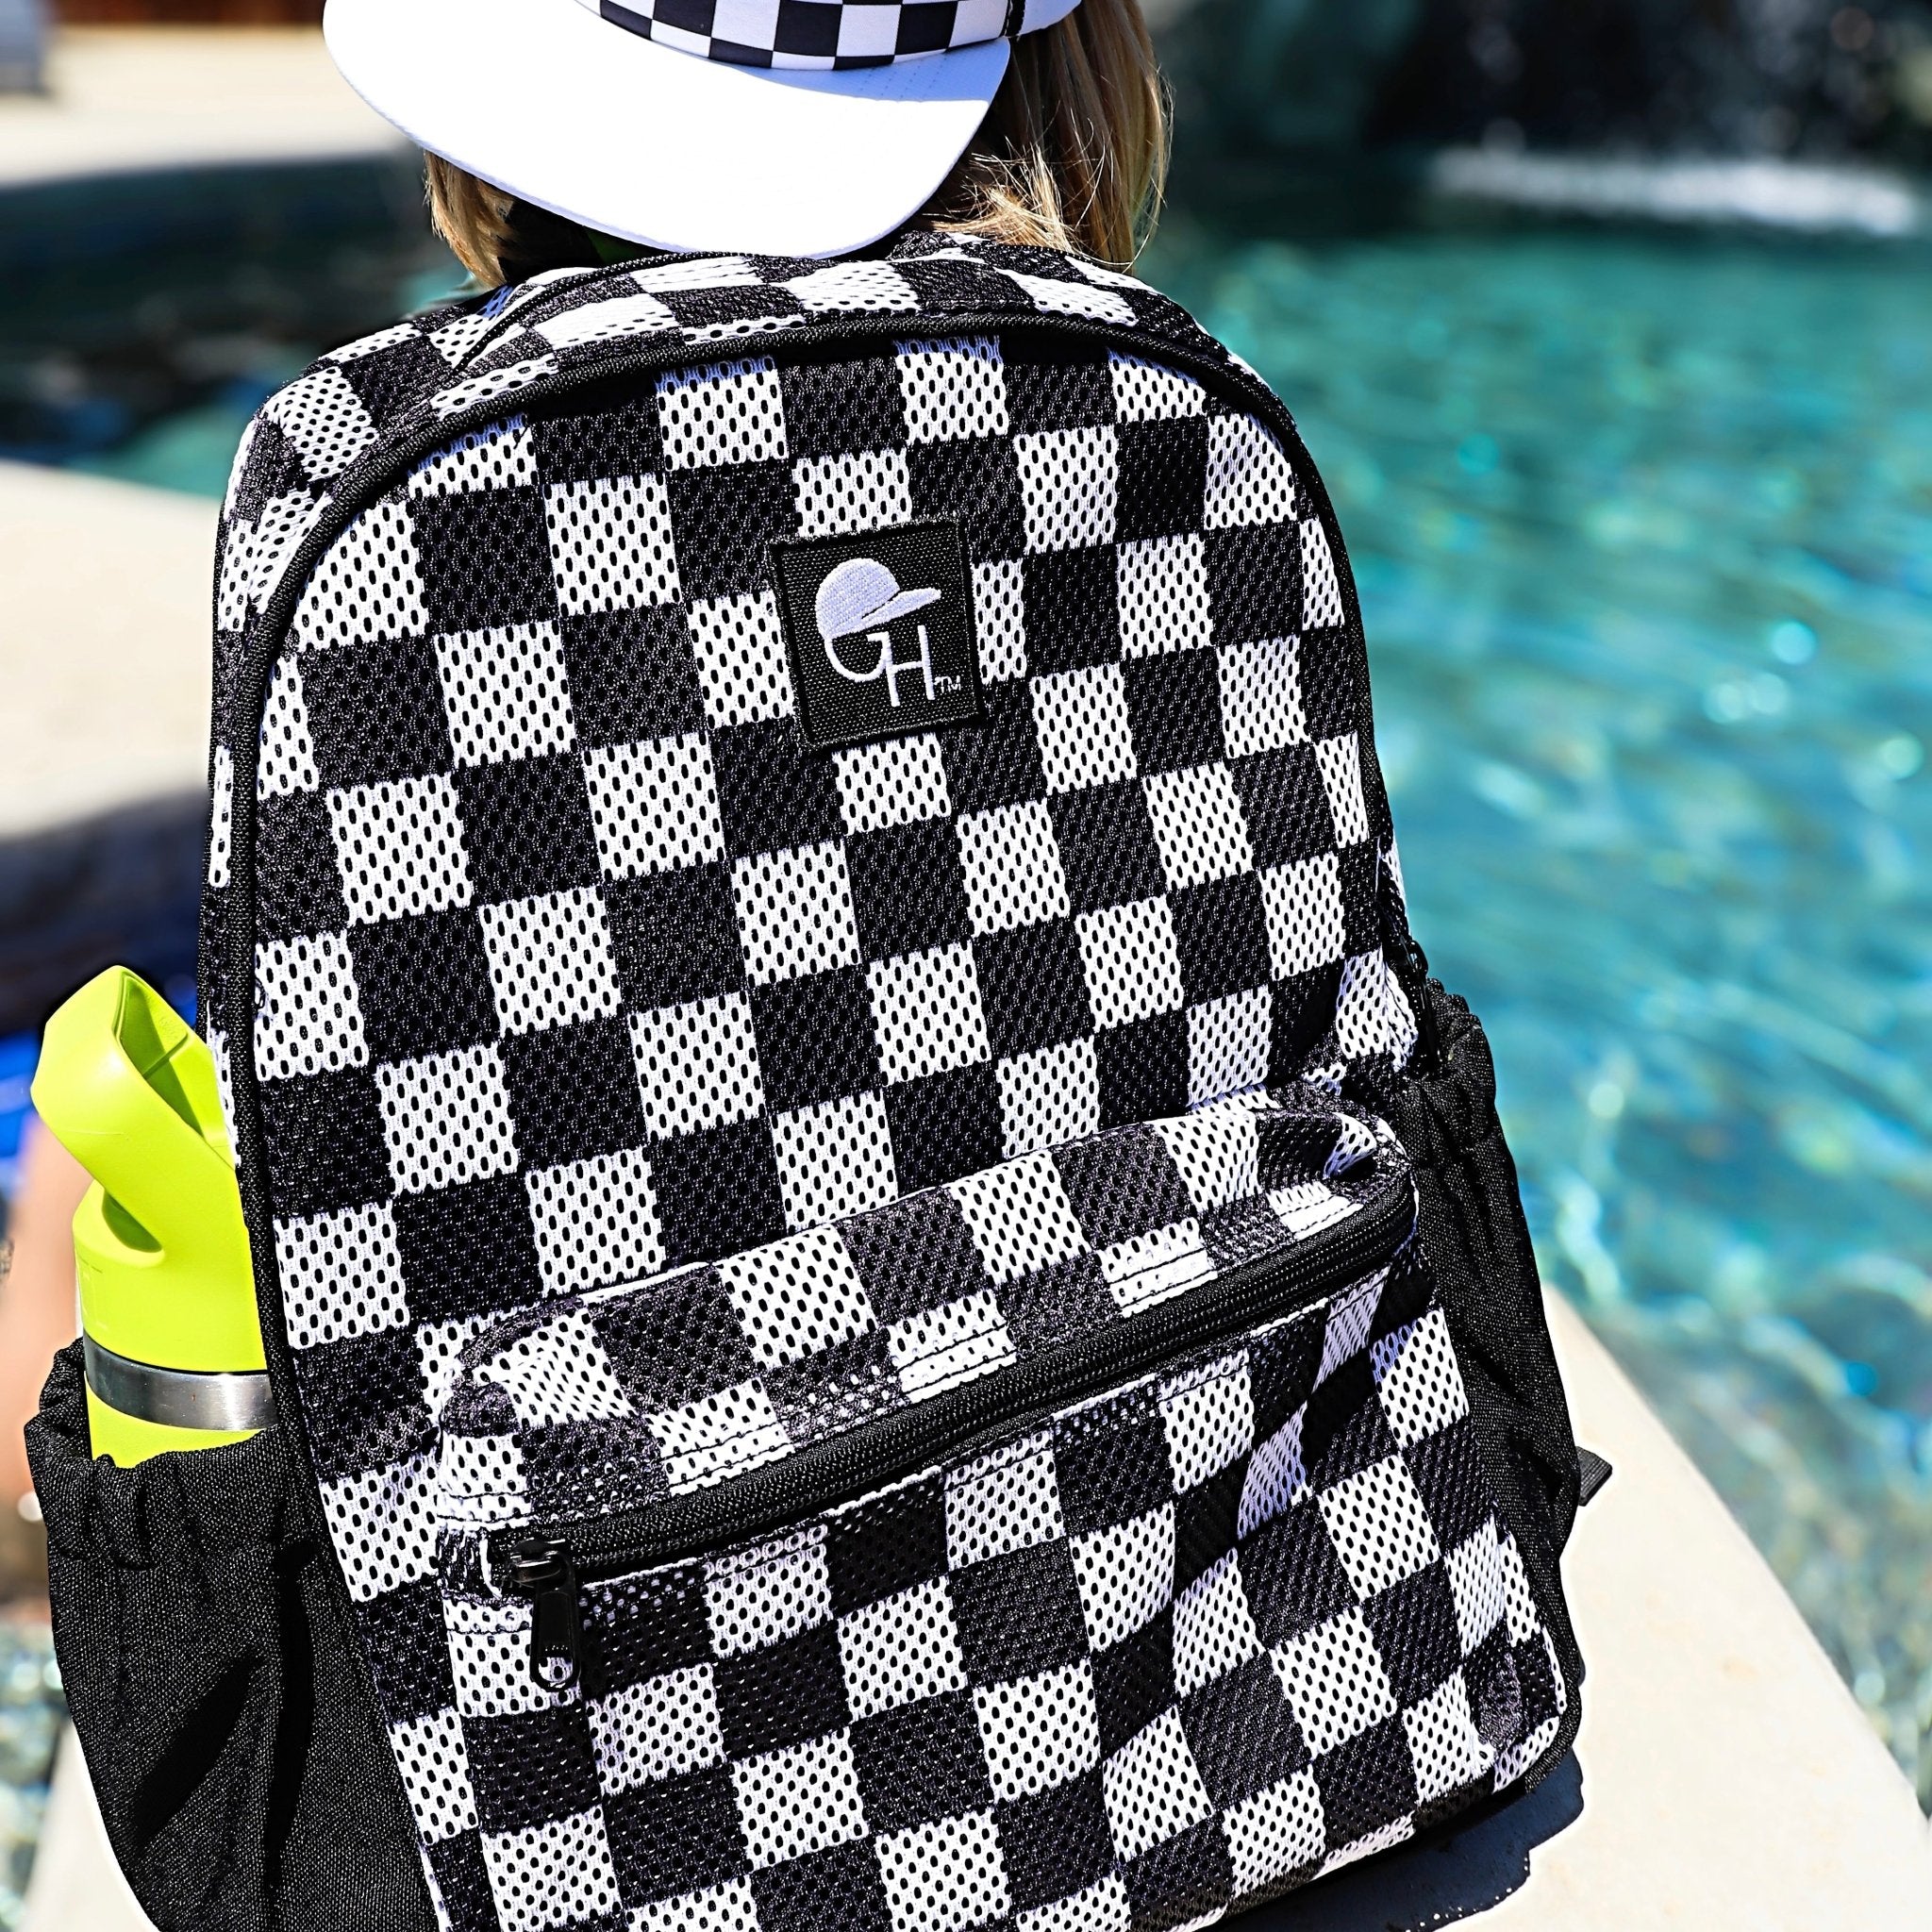 Check Mesh Backpack - George Hats